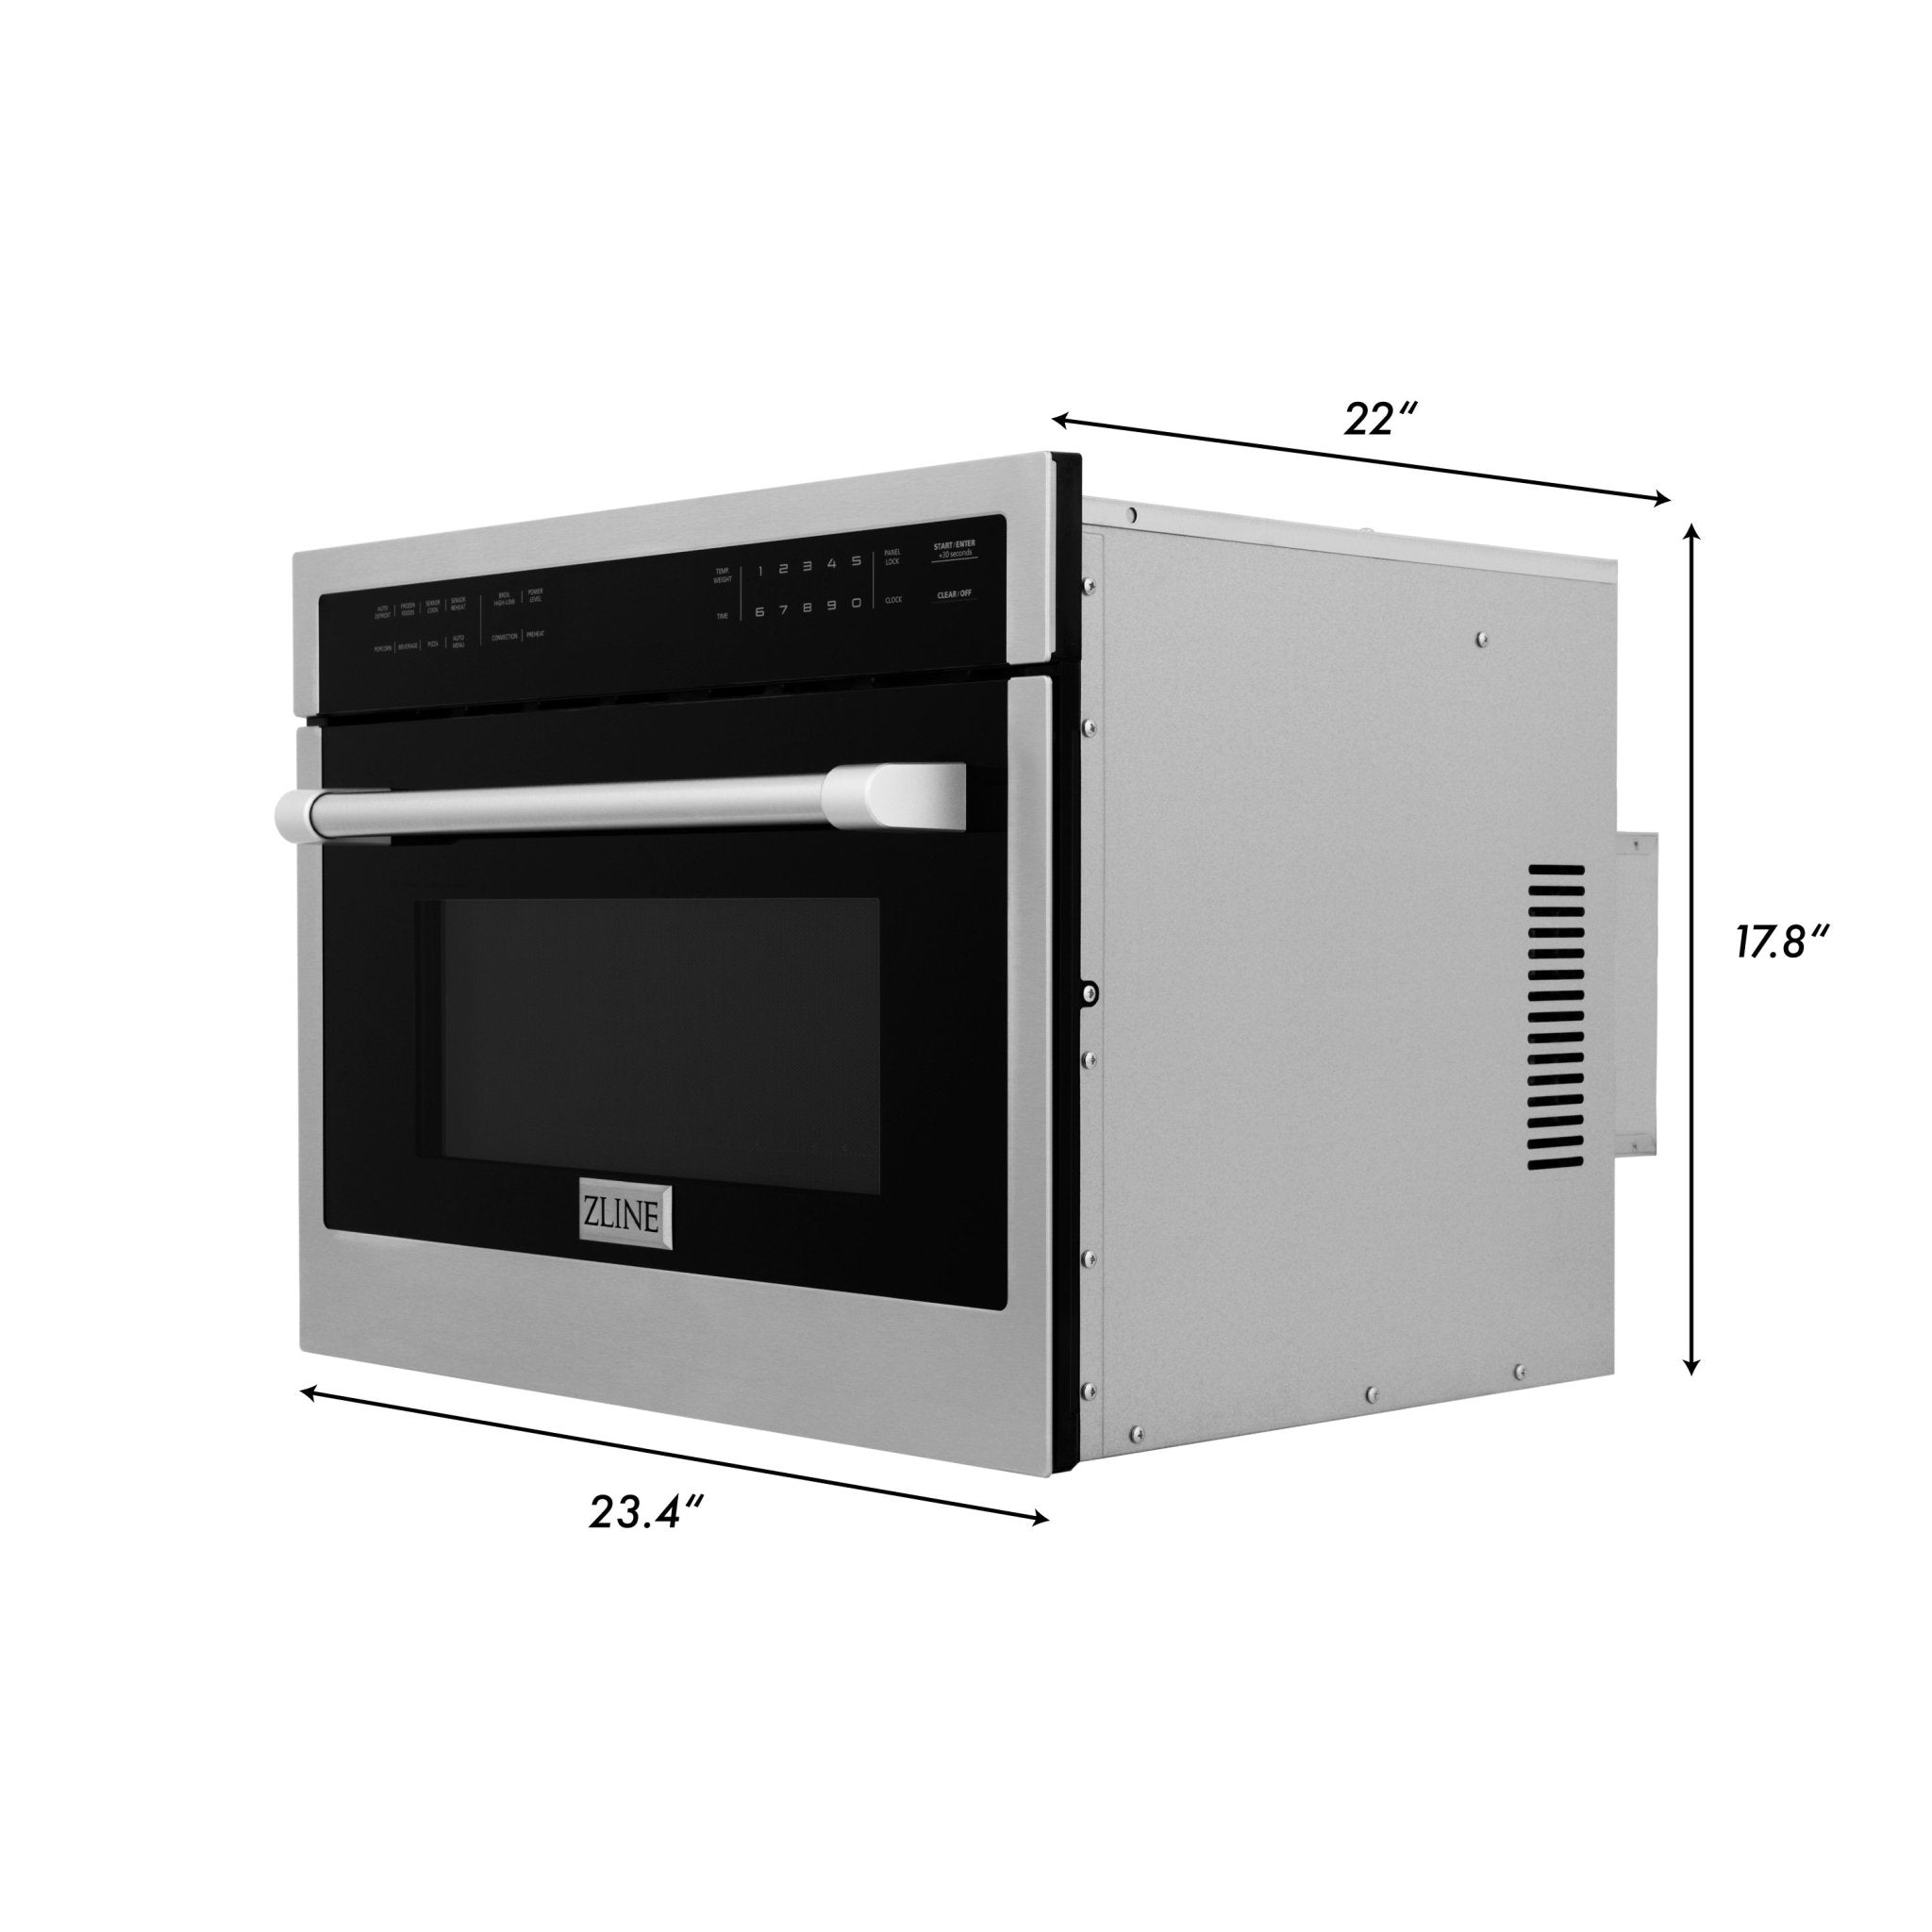 ZLINE 24 in. Built-in Convection Microwave Oven in Stainless Steel with Speed and Sensor Cooking (MWO-24) - New Star Living